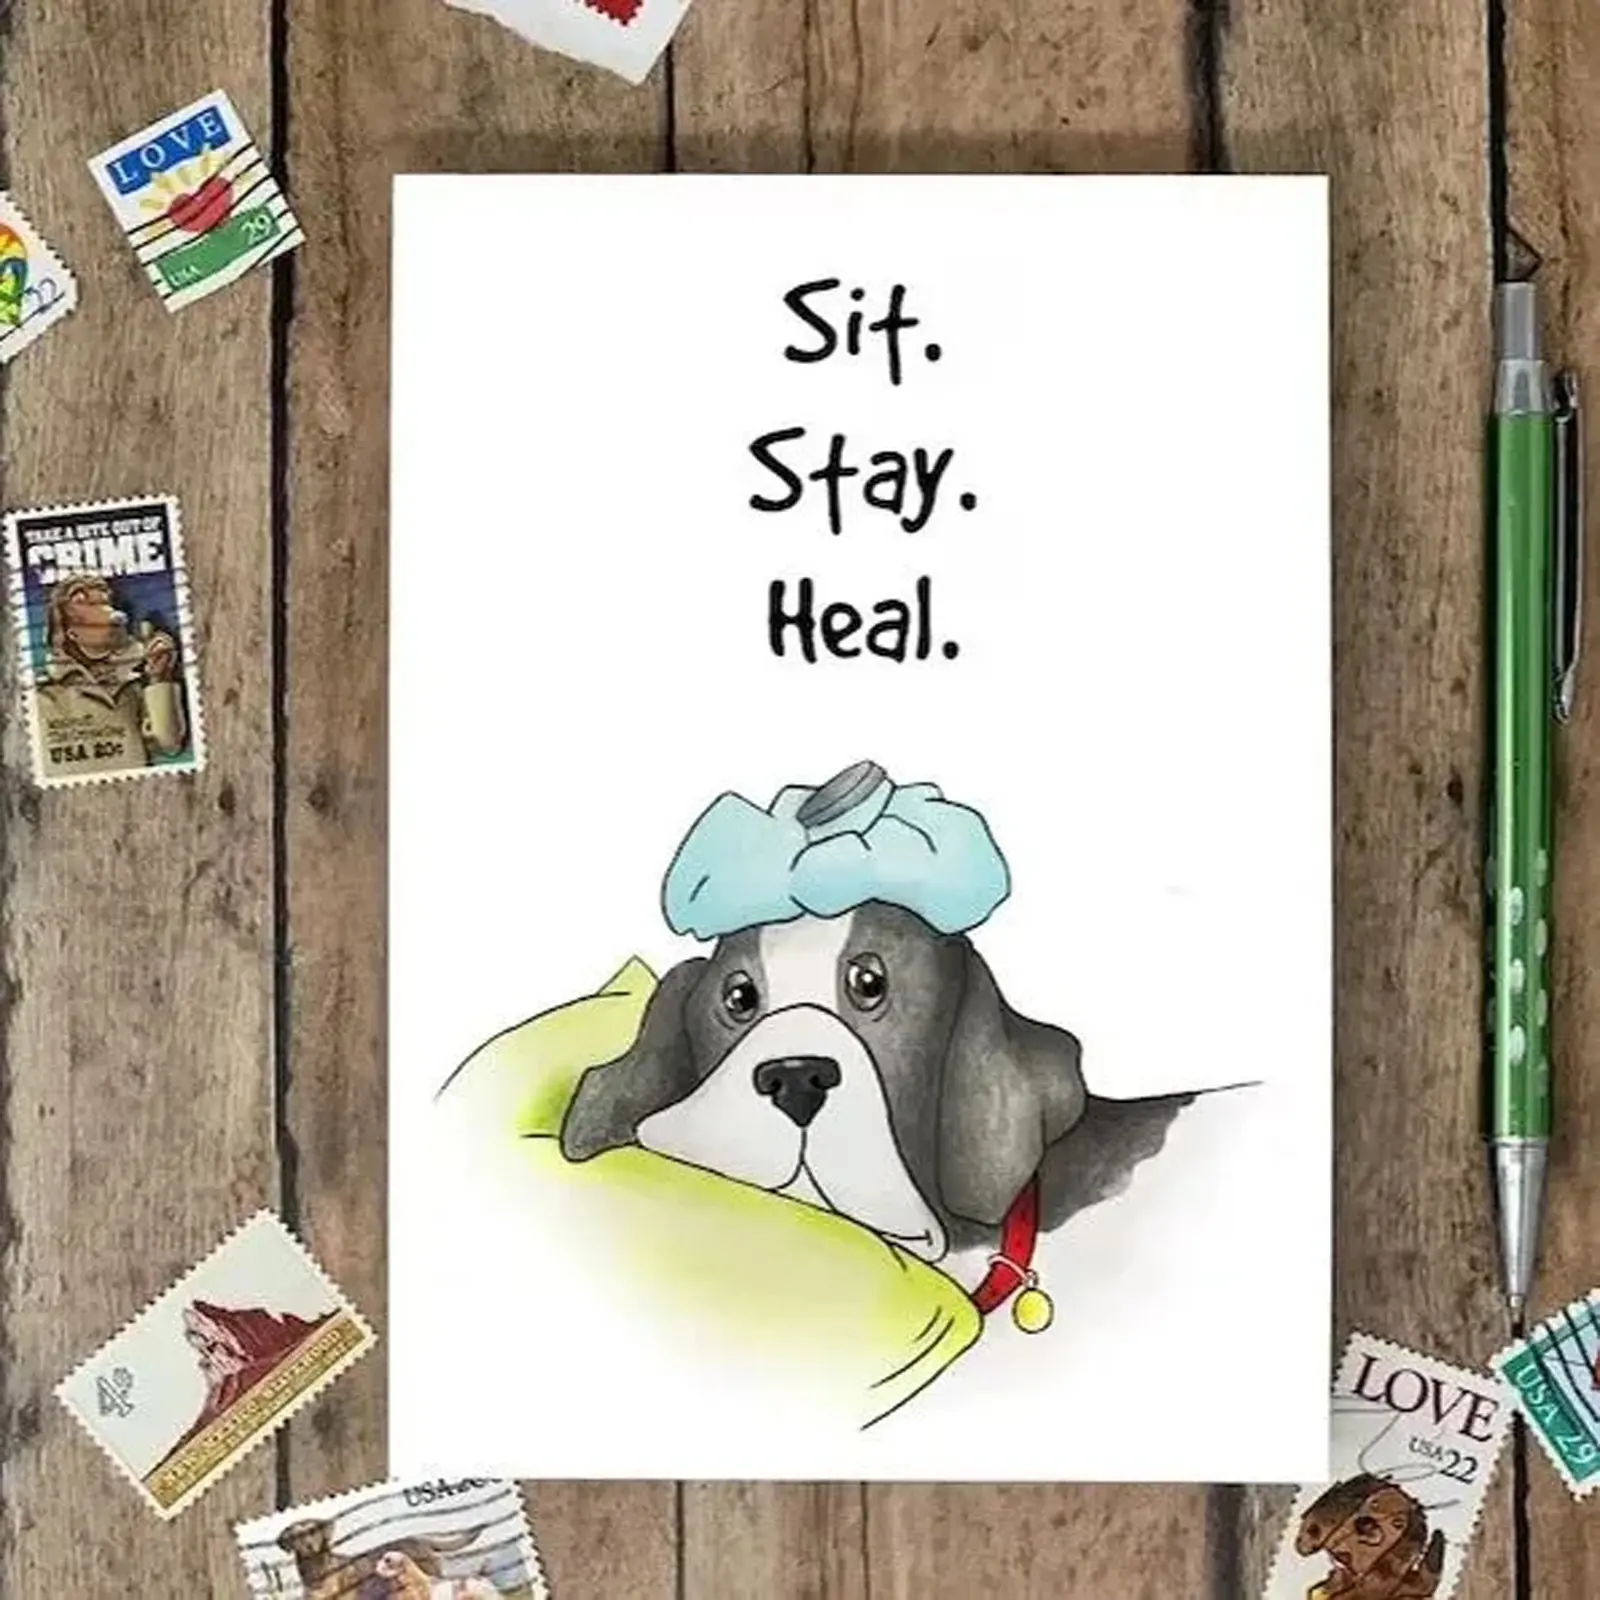 Funny Recovery Card for Him Her Humorous Get Well Soon Card for Friends Well at Least You Don't Have to Wear a Cone Card